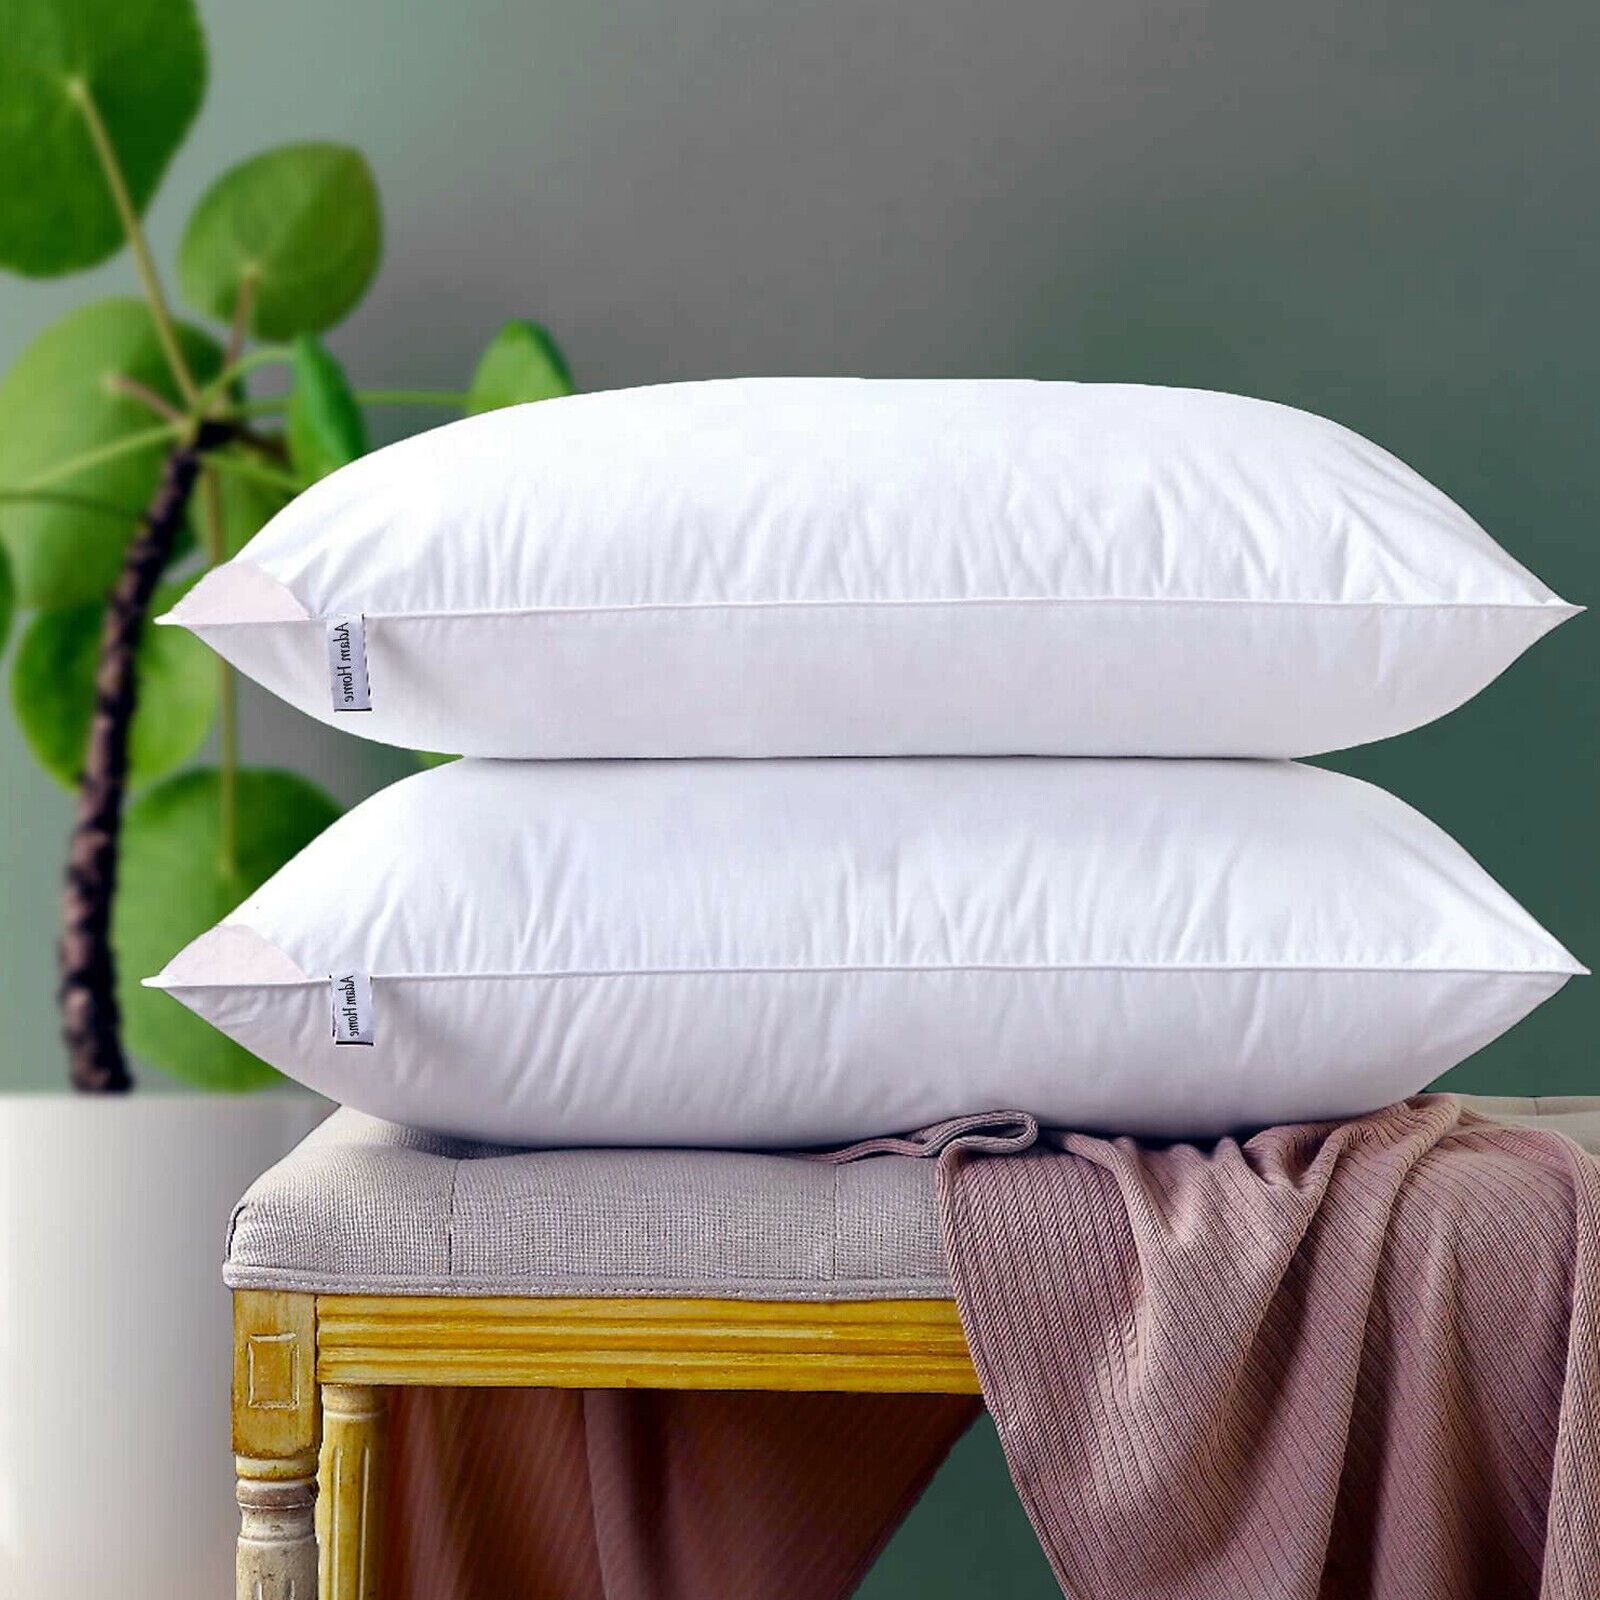 How To Store Extra Pillows